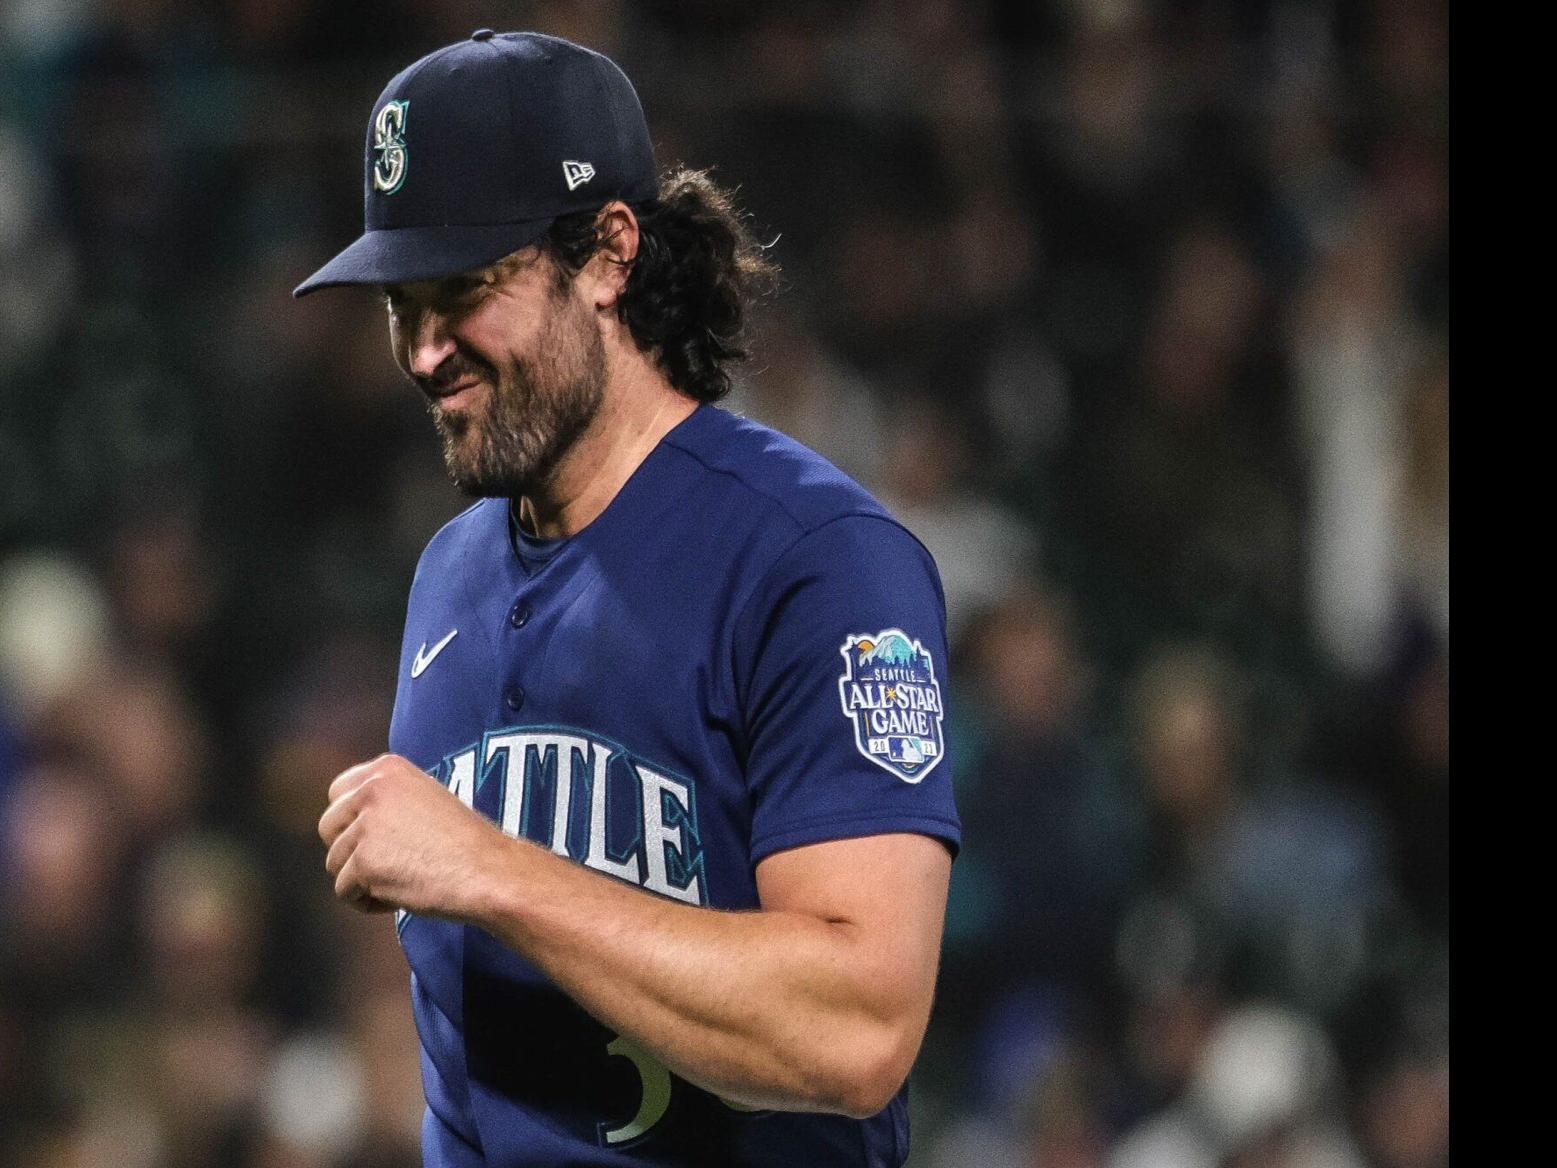 What Were the Mariners Thinking With Robbie Ray Move in Game 1